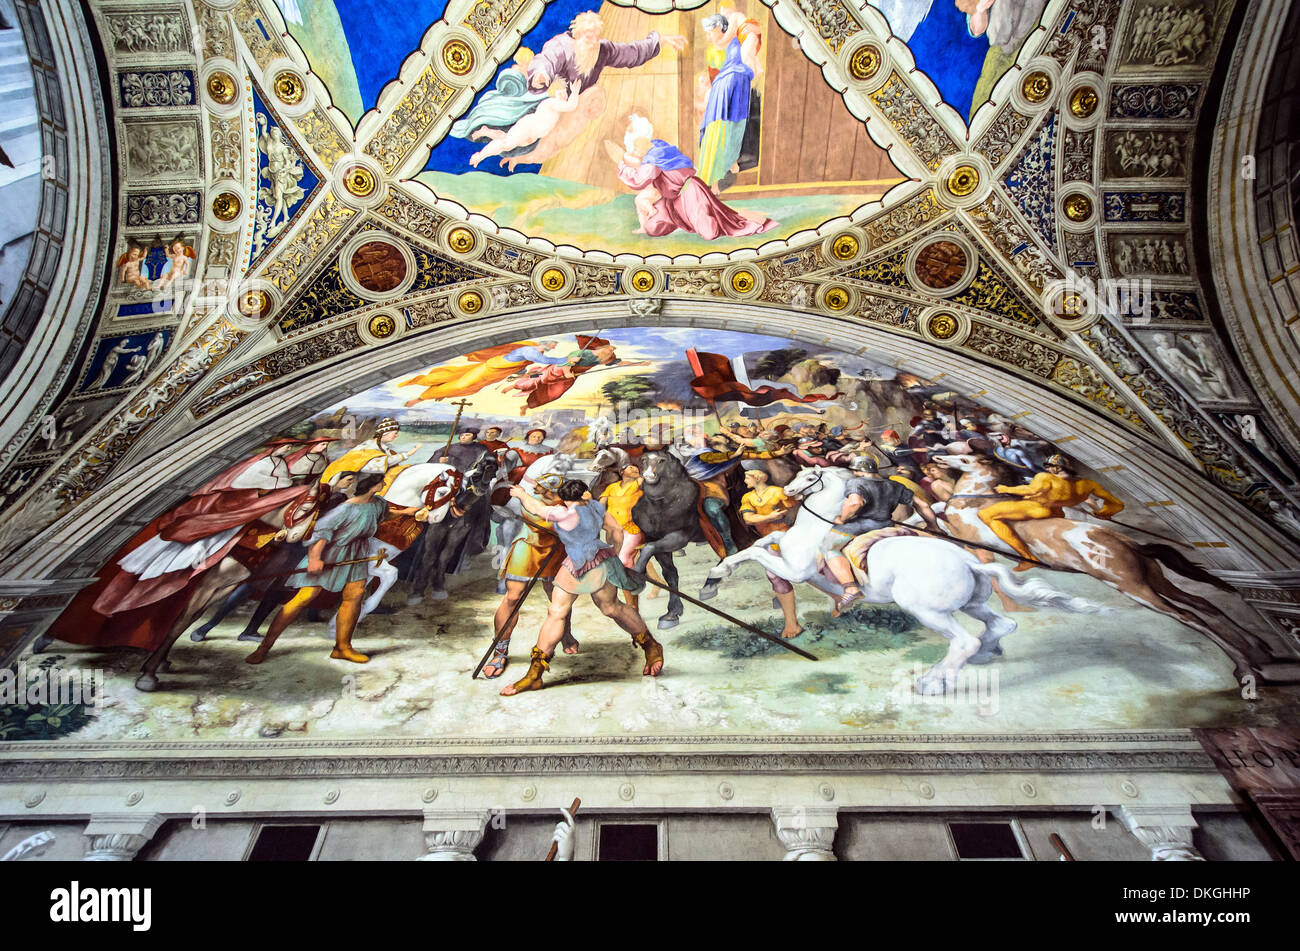 The meeting between Leo the Great and Attila by Raffaello Sanzio (Urbino 1483 - Roma 1520) in the room of Heliodorus in theVatican Museums - Rome, Italy The meeting between Leo the Great and Attila is the last fresco painted in this room and was finished after the death of julius II during the papacy of his successor. In fact Leo X appears twice in the same scene portrayed as Pope Leo the Great and as cardinal. According to the legend, the miraculous appearence of St. Peter and St. Paul armed with swords during the meeting between Pope Leo the Great and Attila (452 A.D.) caused the King of the Stock Photo